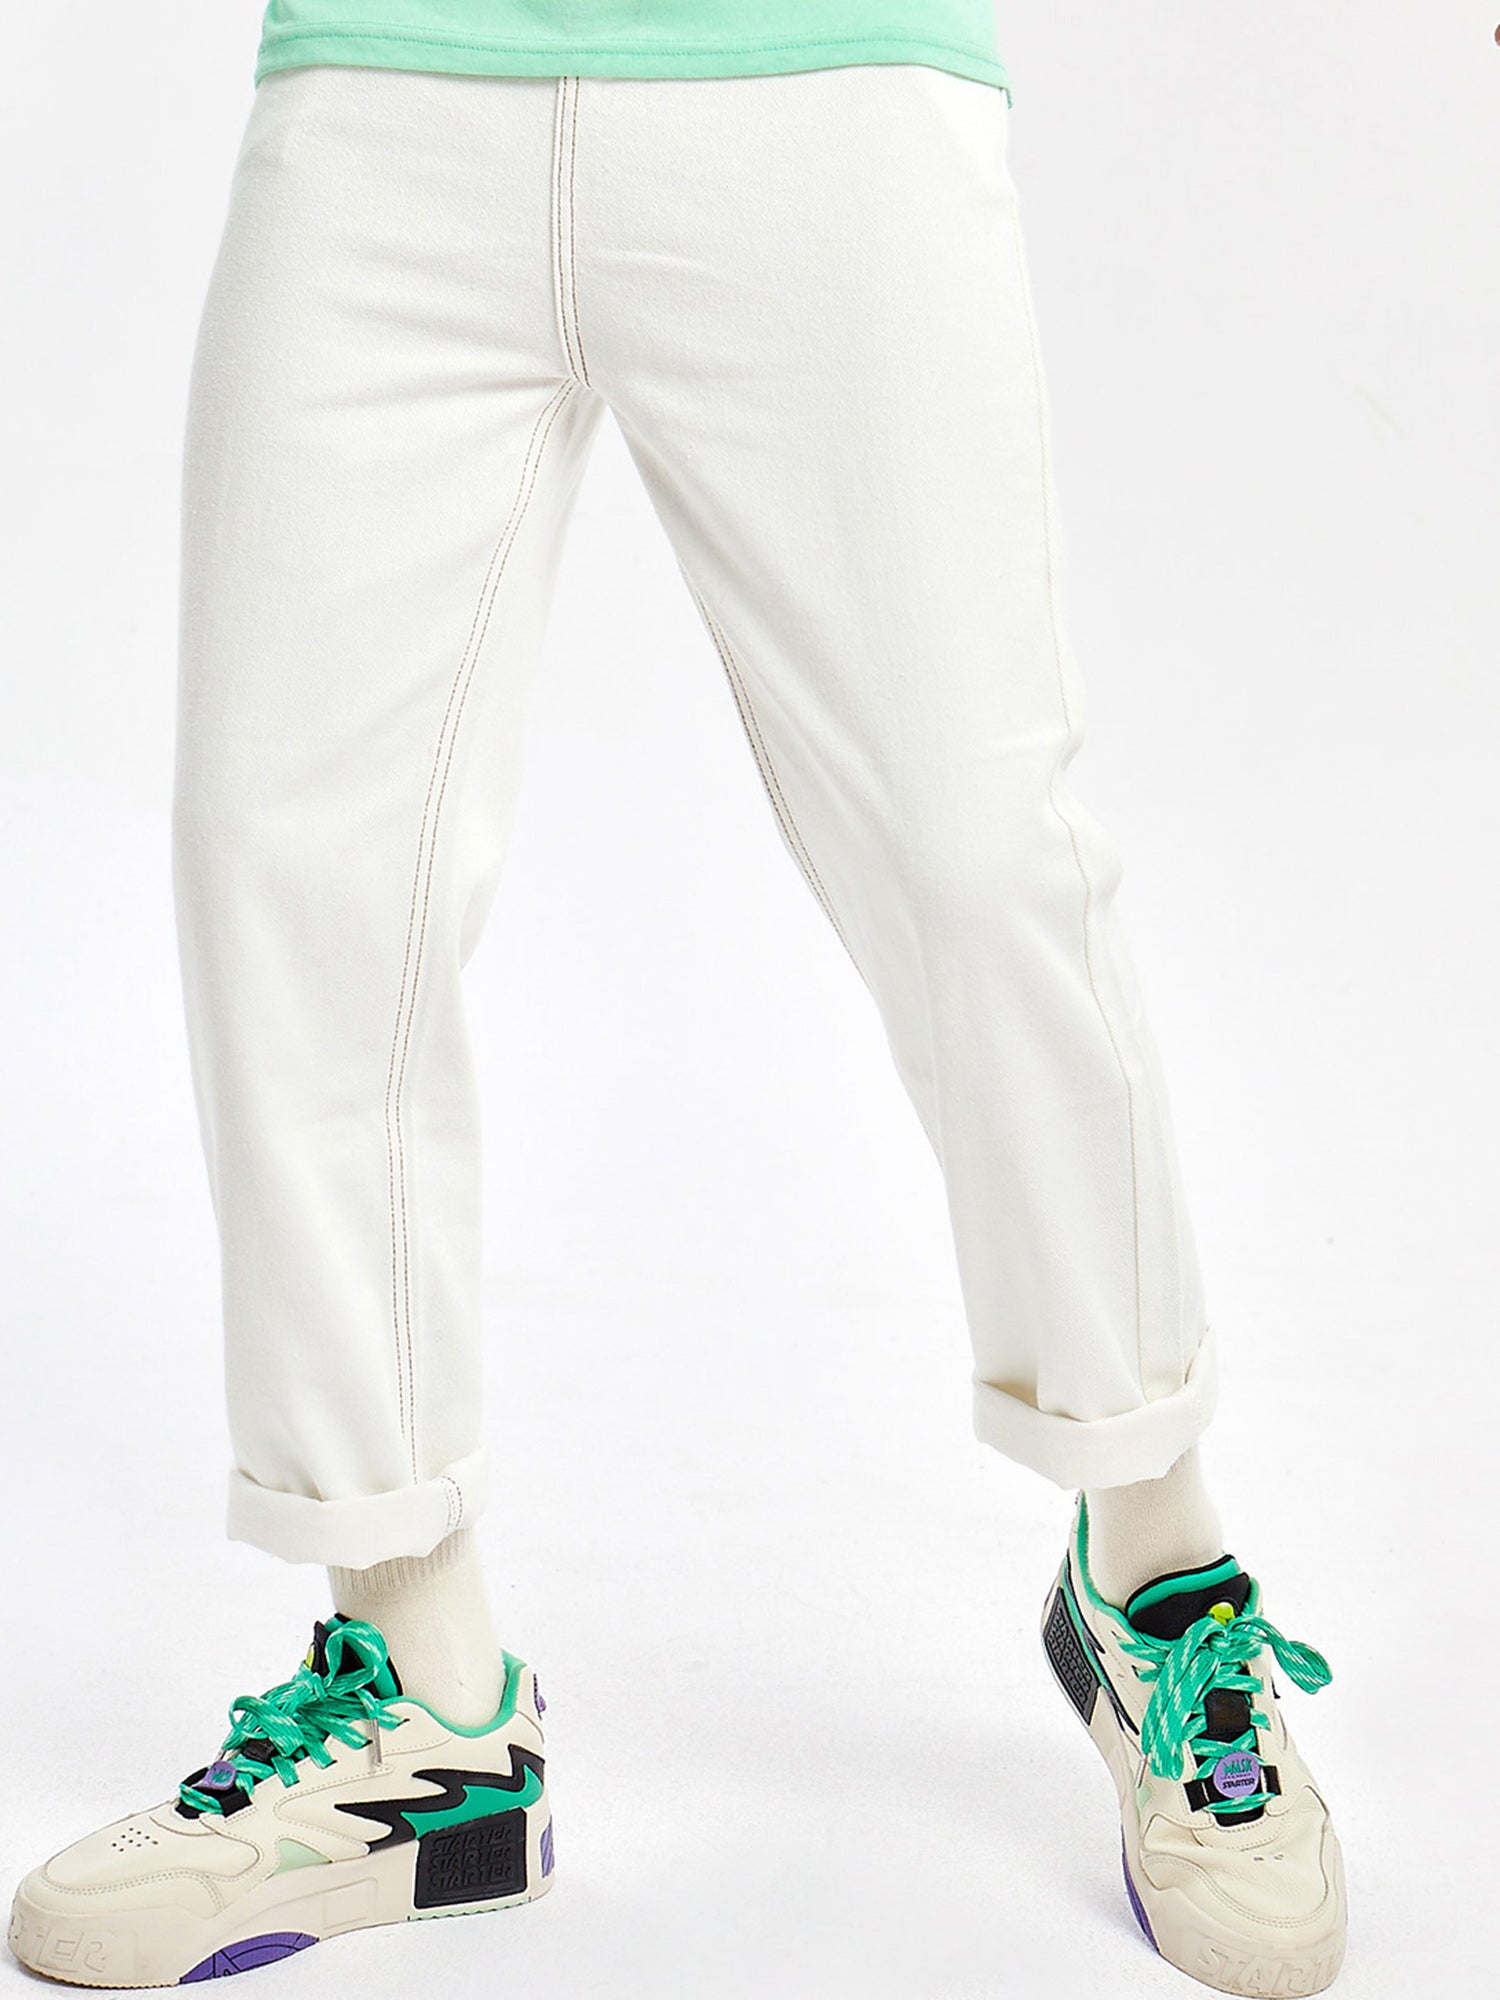 JUSTNOTAG Casual Street HipHop Print White Long Jeans